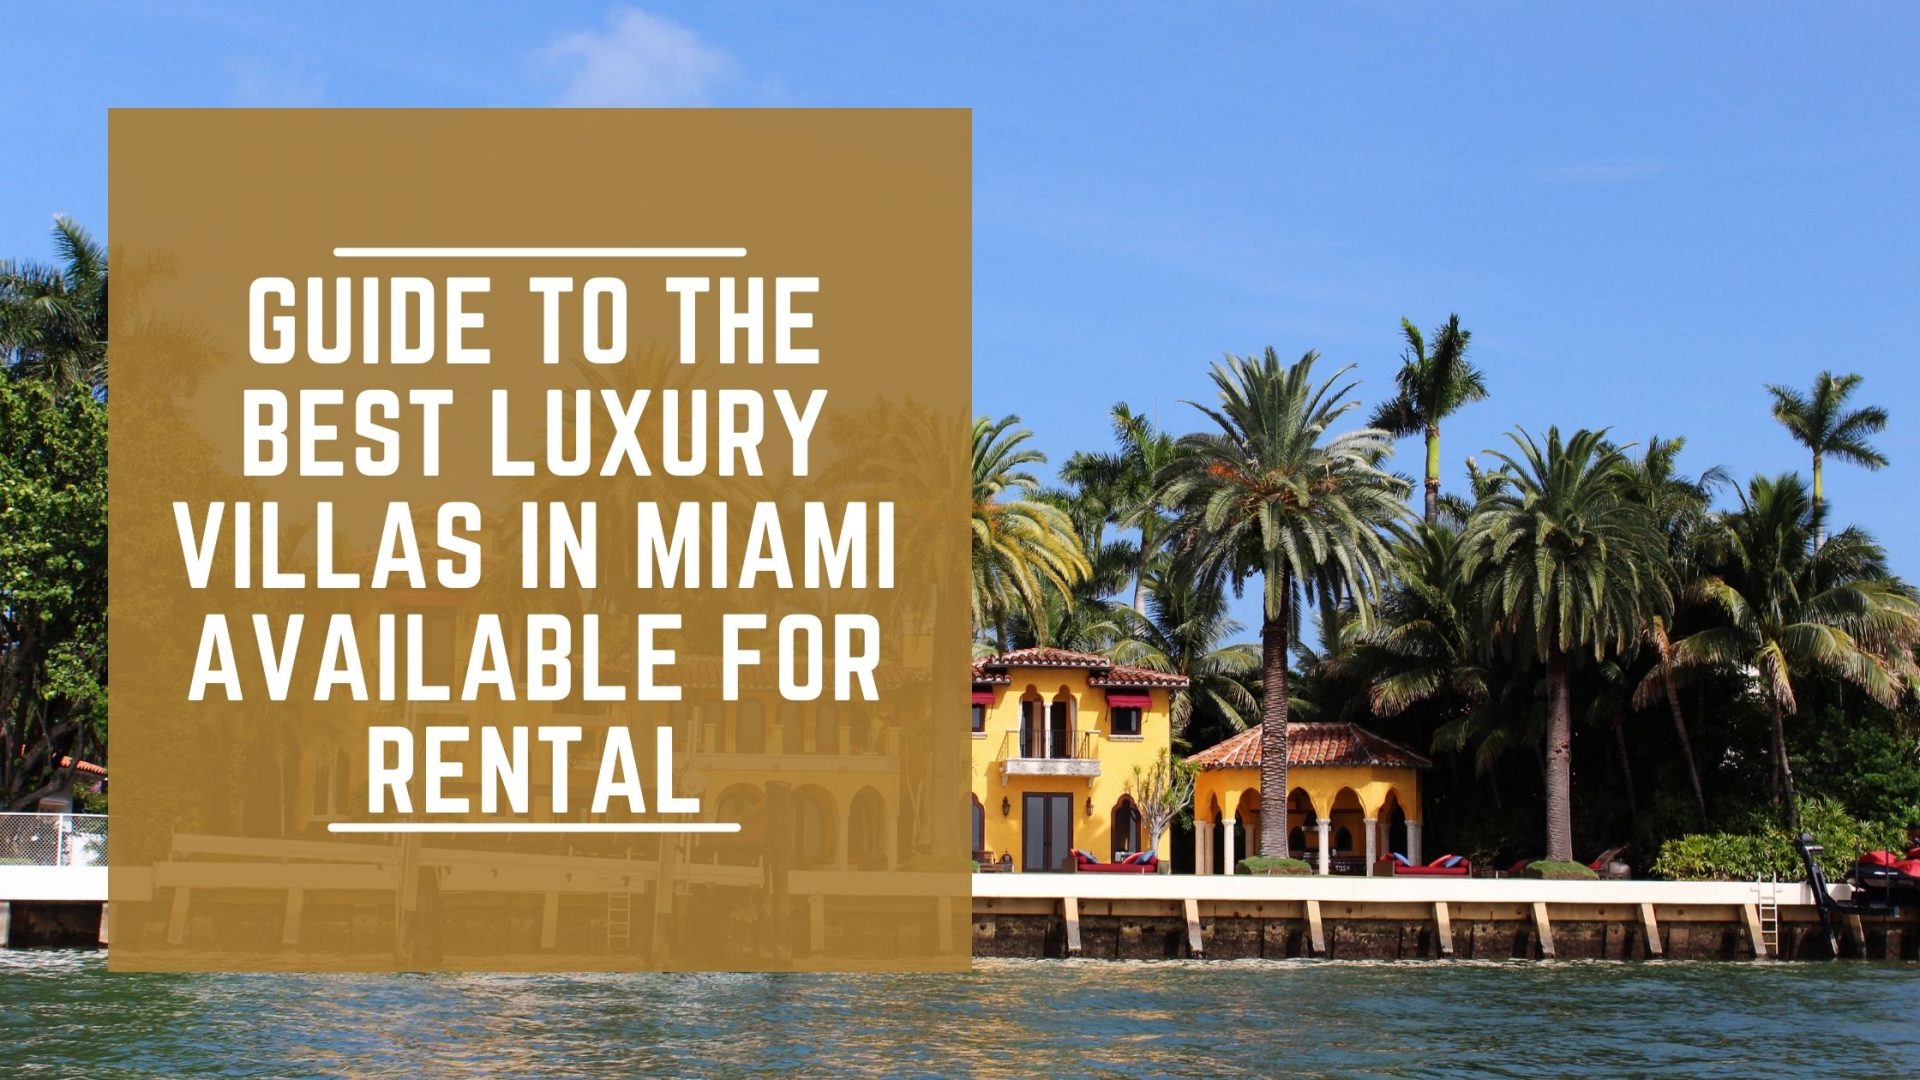 Guide To The Best Luxury Villas In Miami Available For Rental